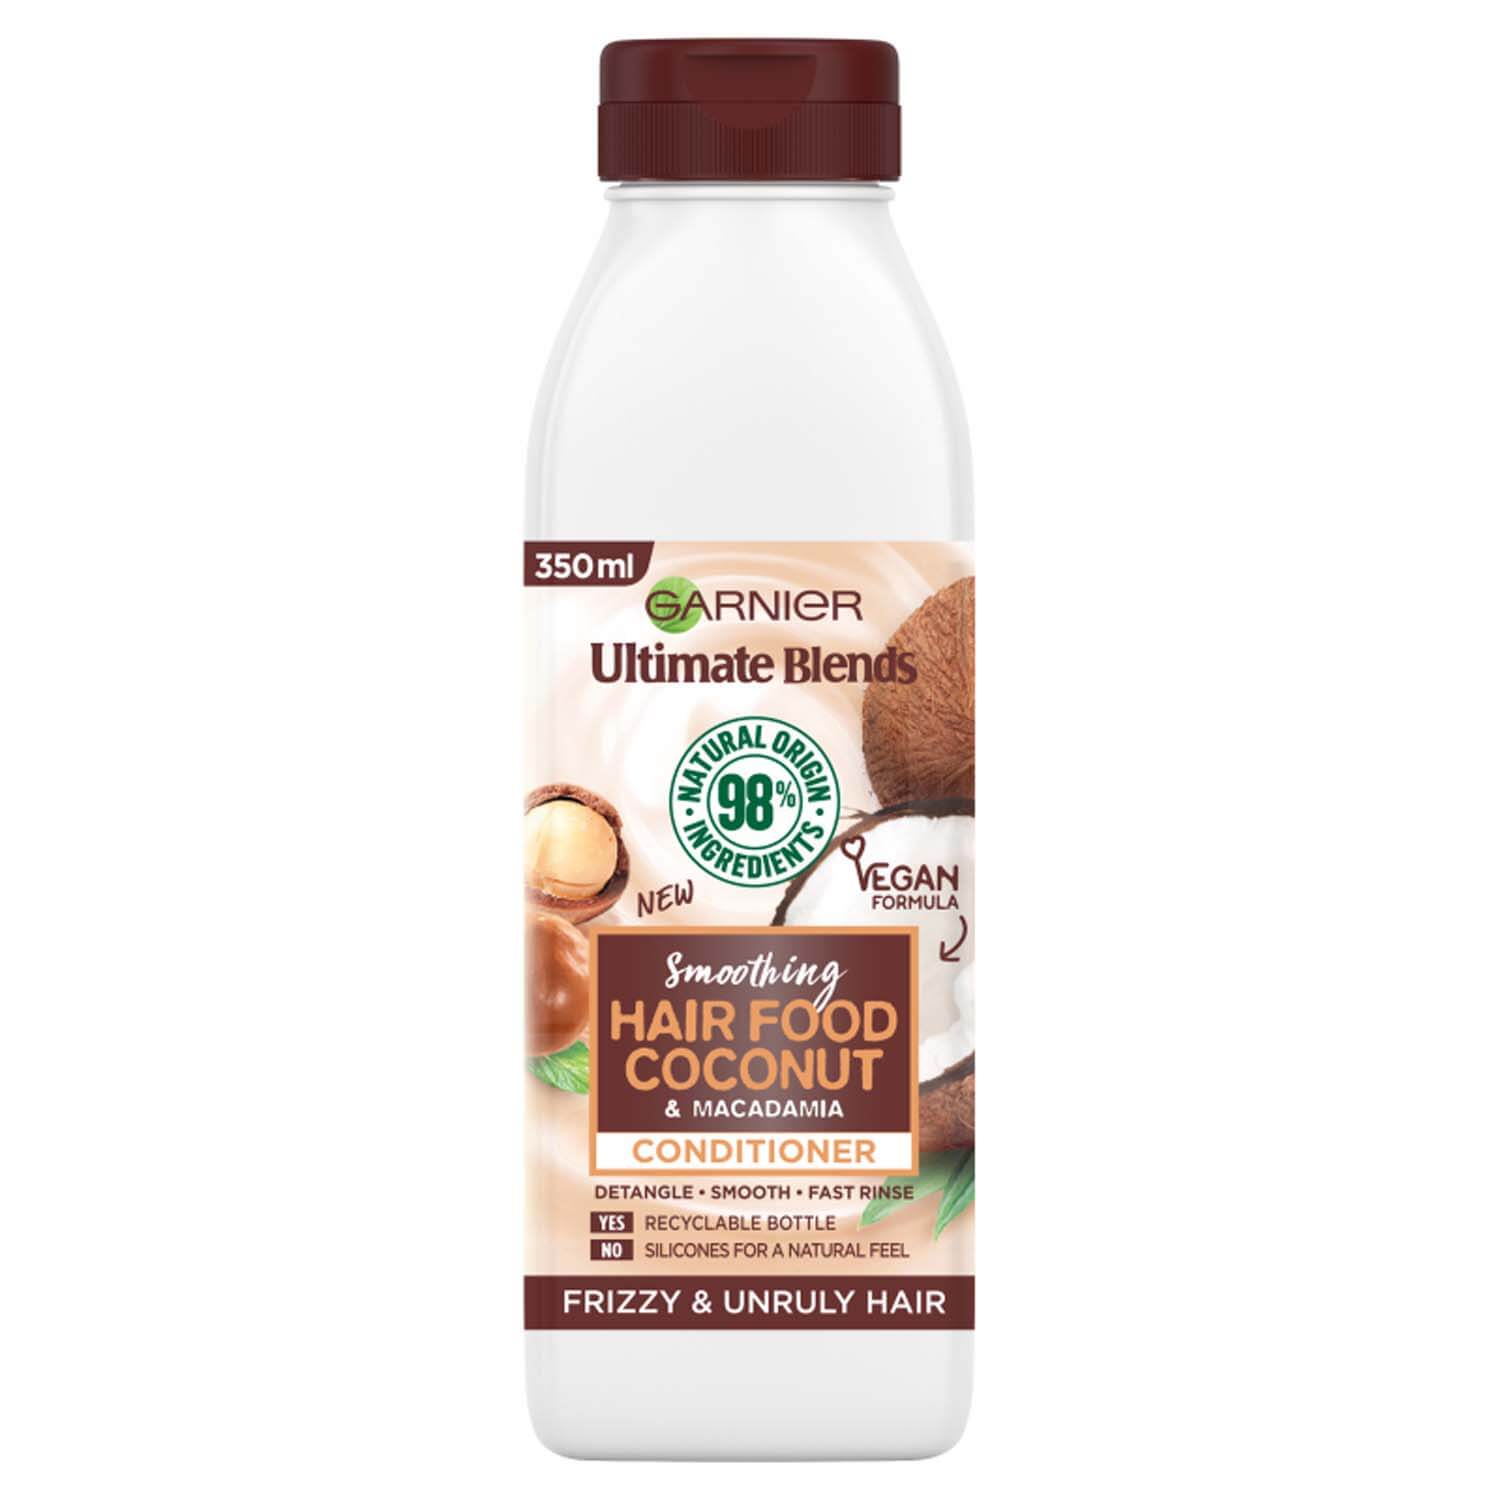 Garnier Ultimate Blends Smoothing Hair Food Coconut Conditioner - 350ml 1 Shaws Department Stores